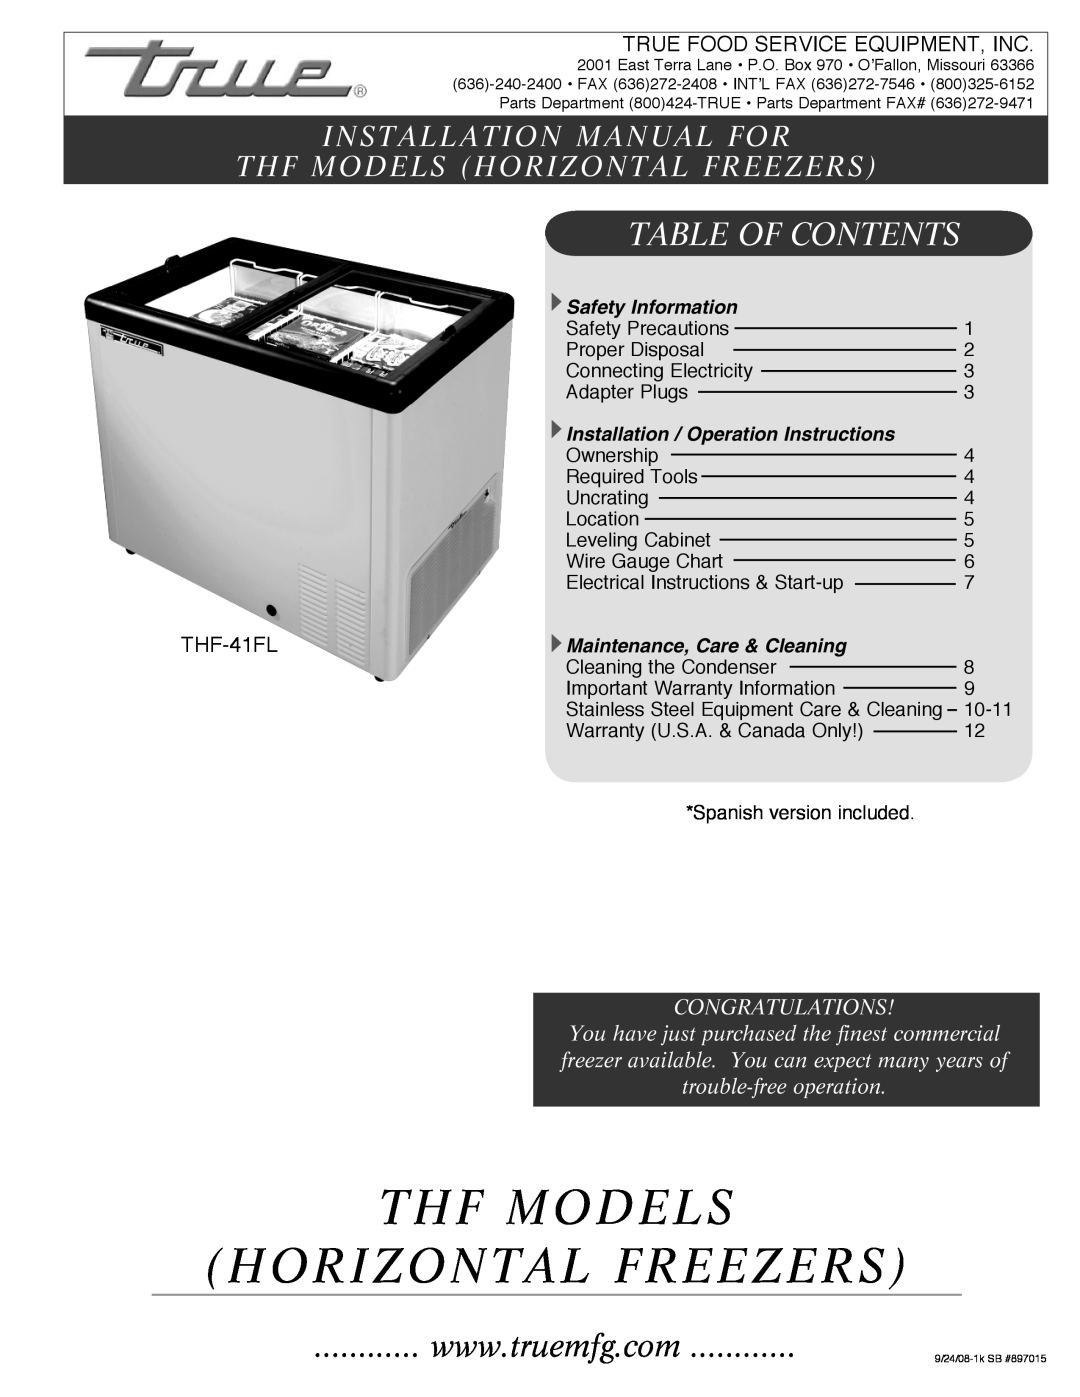 True Manufacturing Company THF-41FL installation manual Thf Models Horizontal Freezers, Table Of Contents, Congratulations 